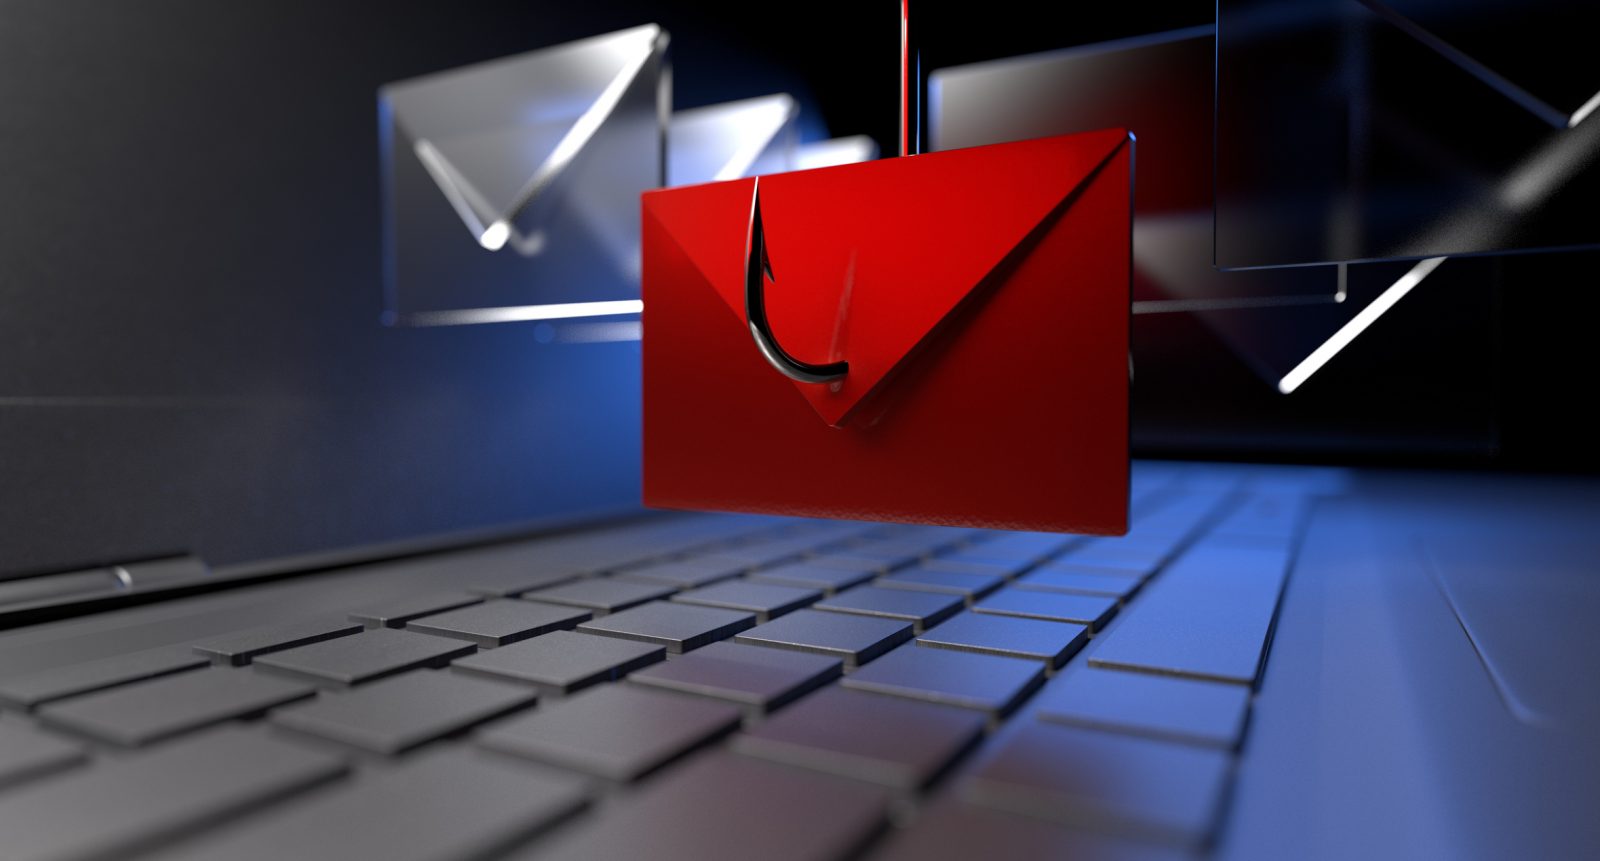 In this close up digital illustration of a laptop computer, a fishing hook snags a red envelope that is hovering over the laptop keyboard. Several other clear envelopes surround the red envelope.